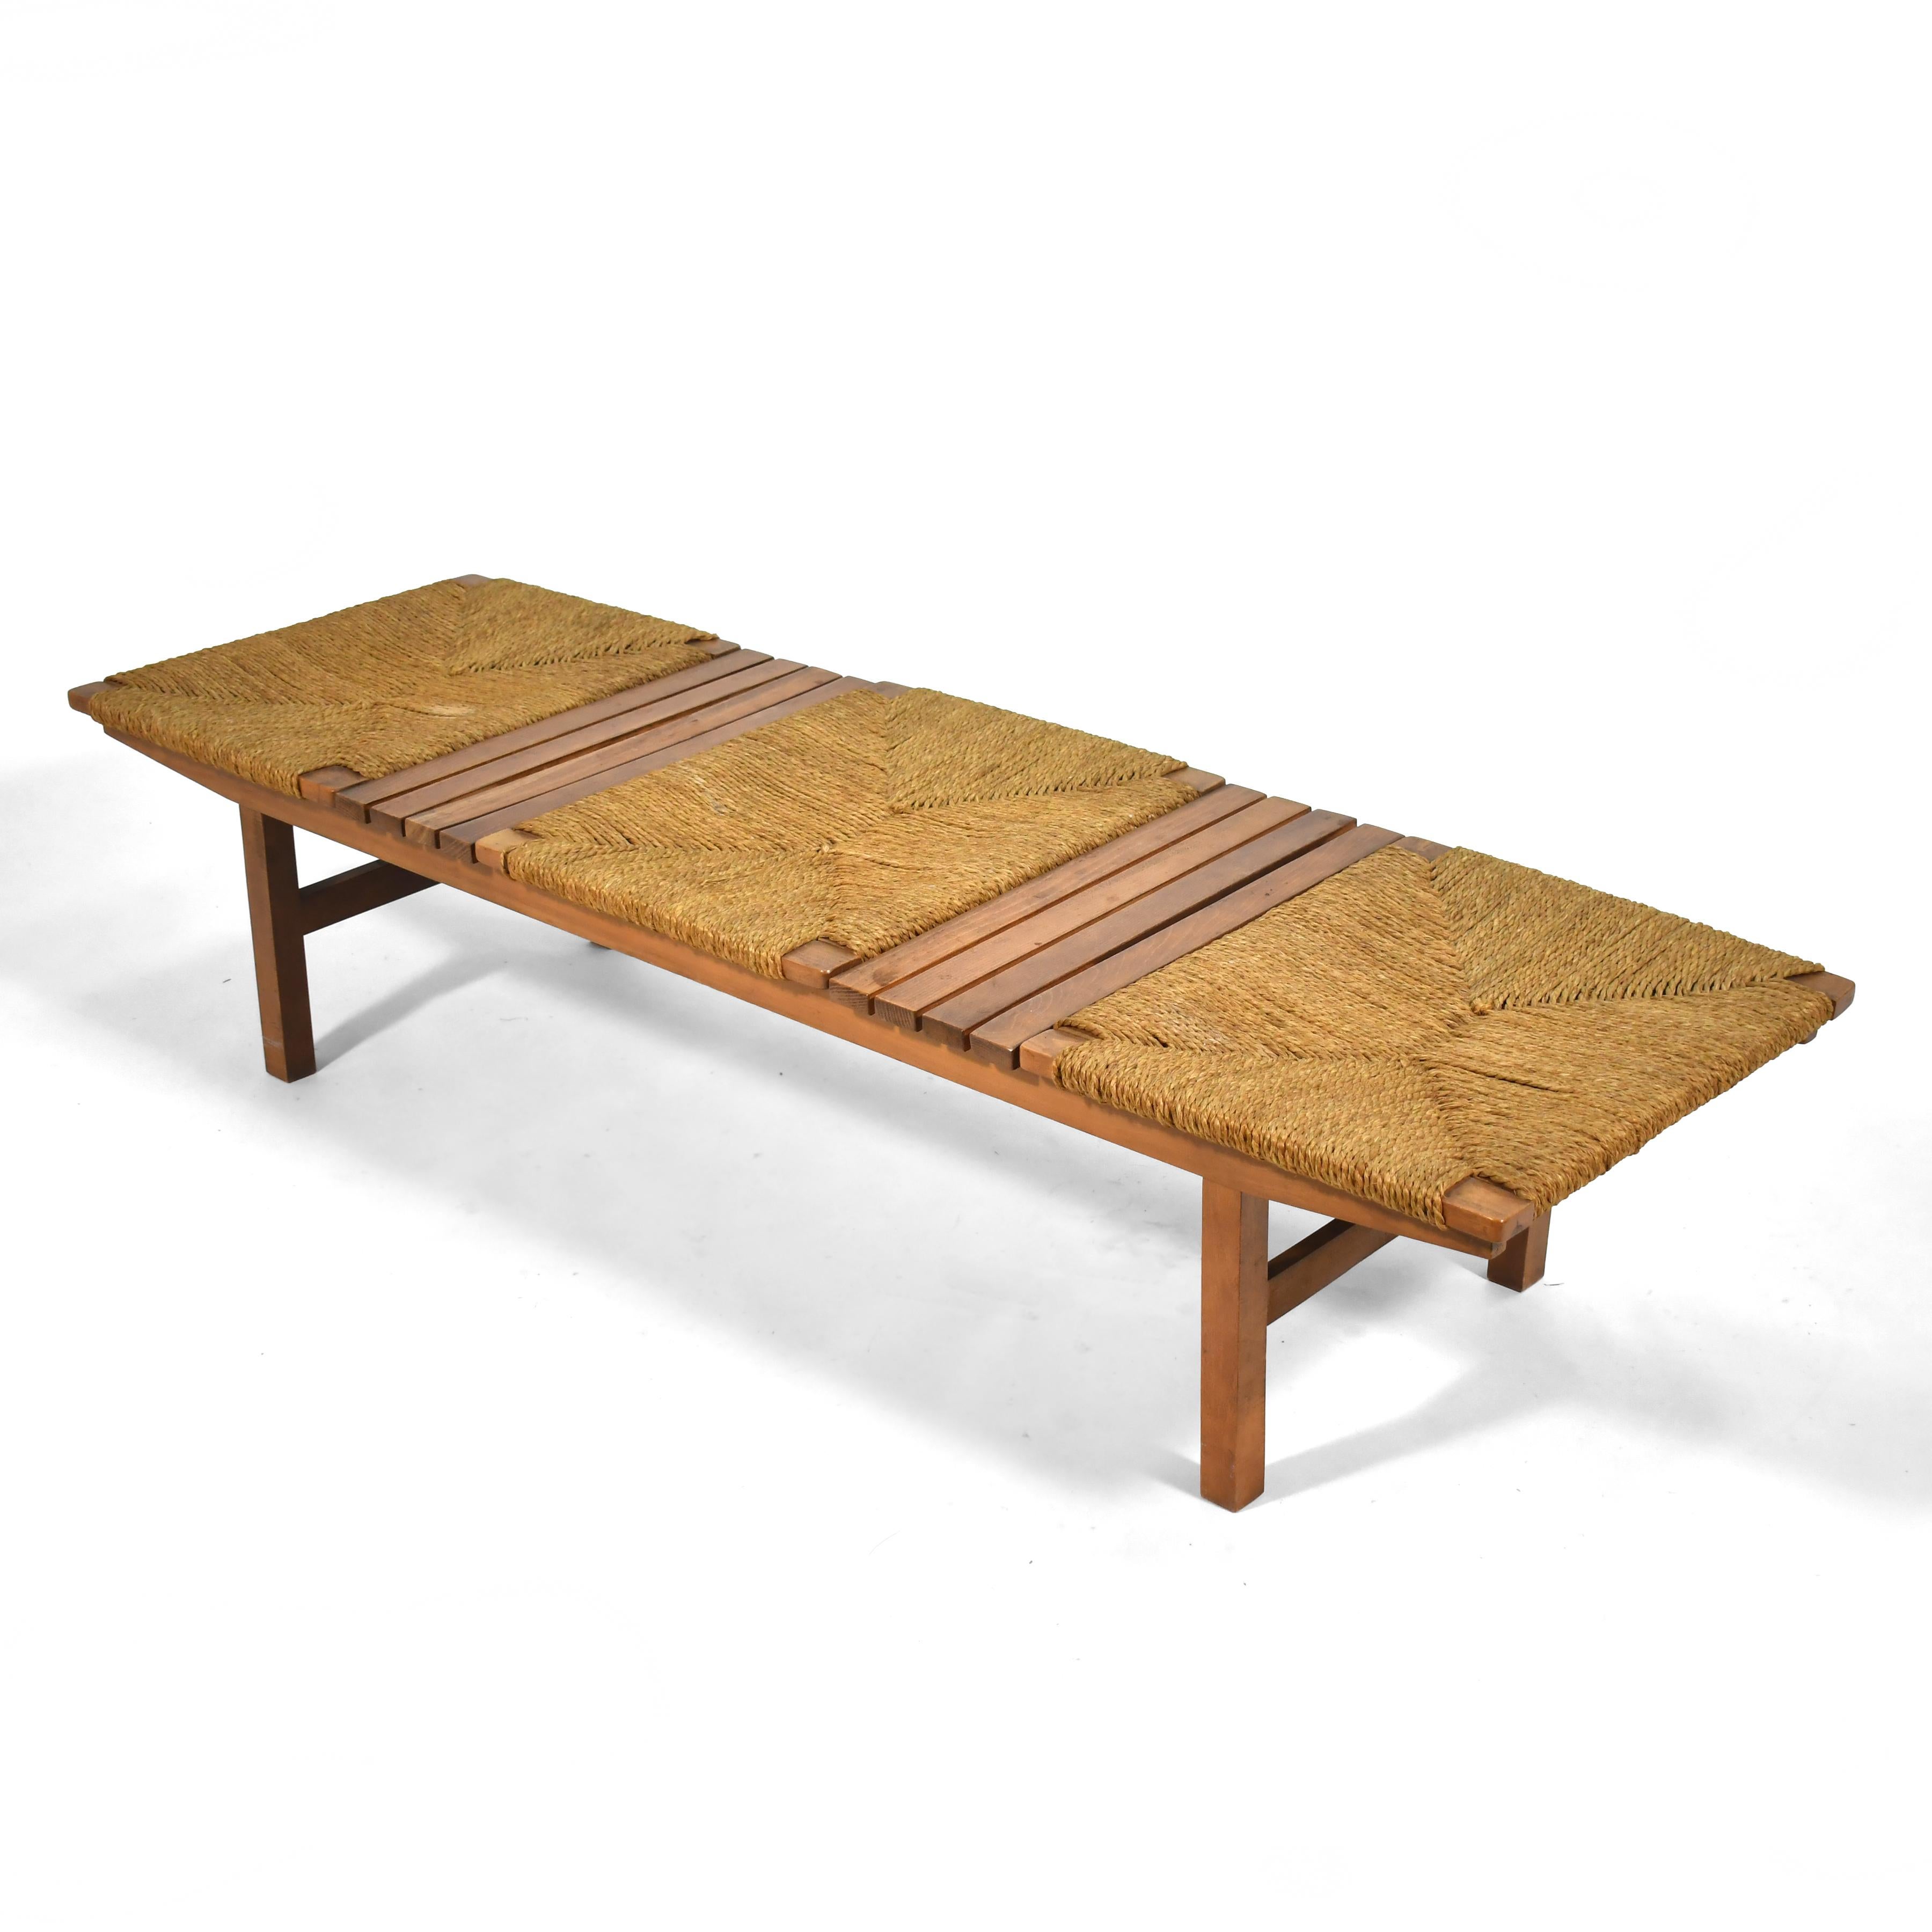 This striking bench has a combination of wood slats and woven jute seats. Manufactured by AFM Quality Furniture in Japan it has a hand-hewn quality and the understated design reminds us of the elegant simplicity of some of Charlotte Perriand's